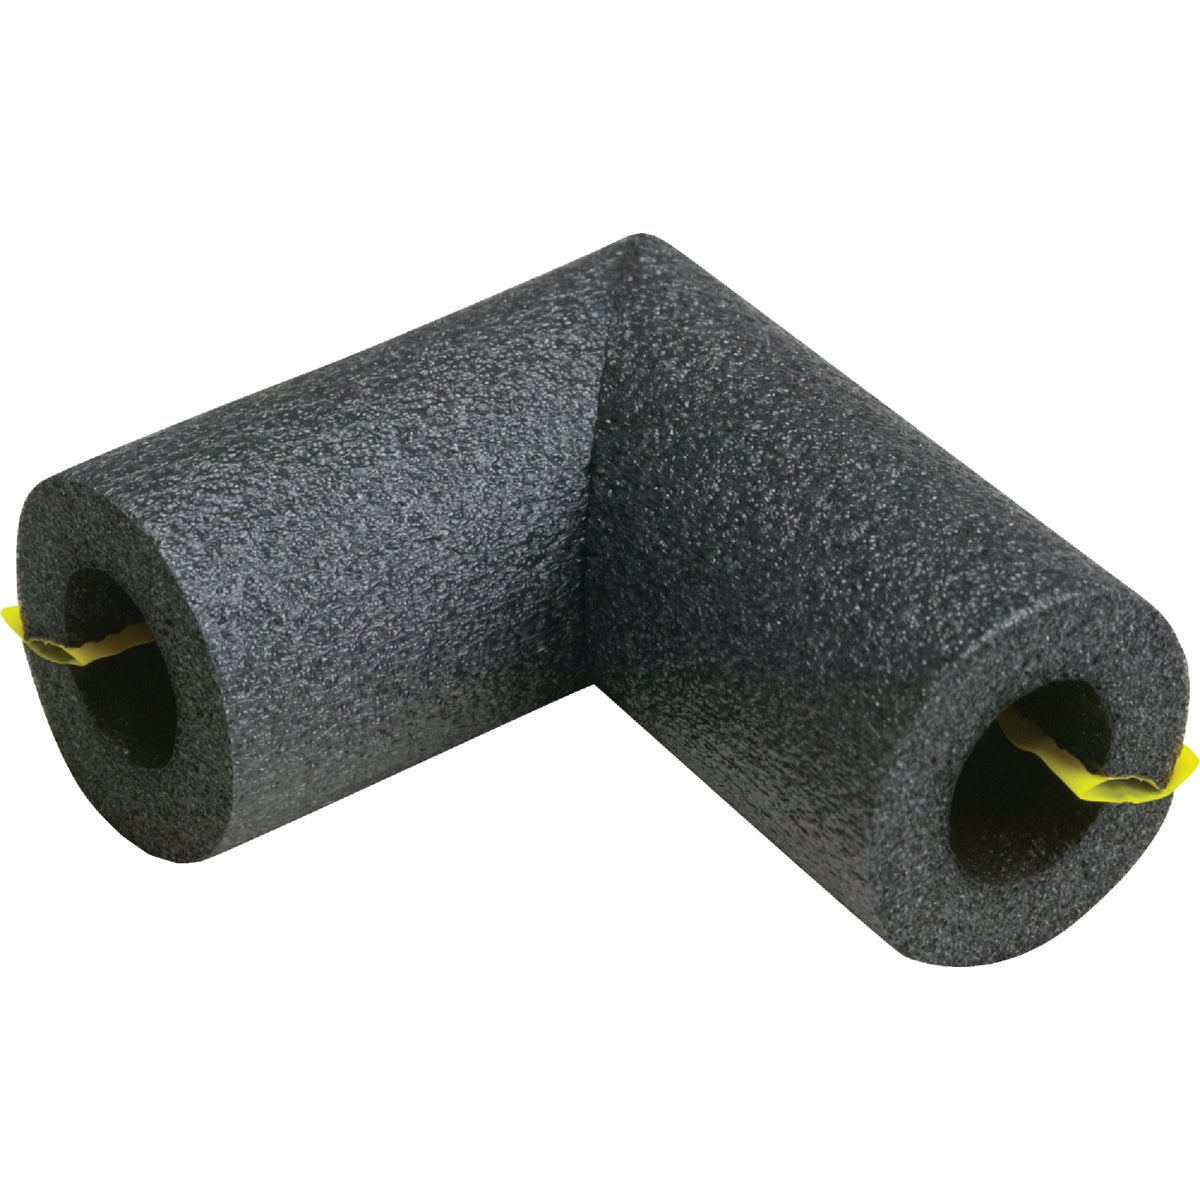 Tundra 1/2 In. Wall Self-Sealing Elbow Polyethylene Pipe Insulation Wrap, 1/2 In. Fits Pipe Size 1/2 In. Copper